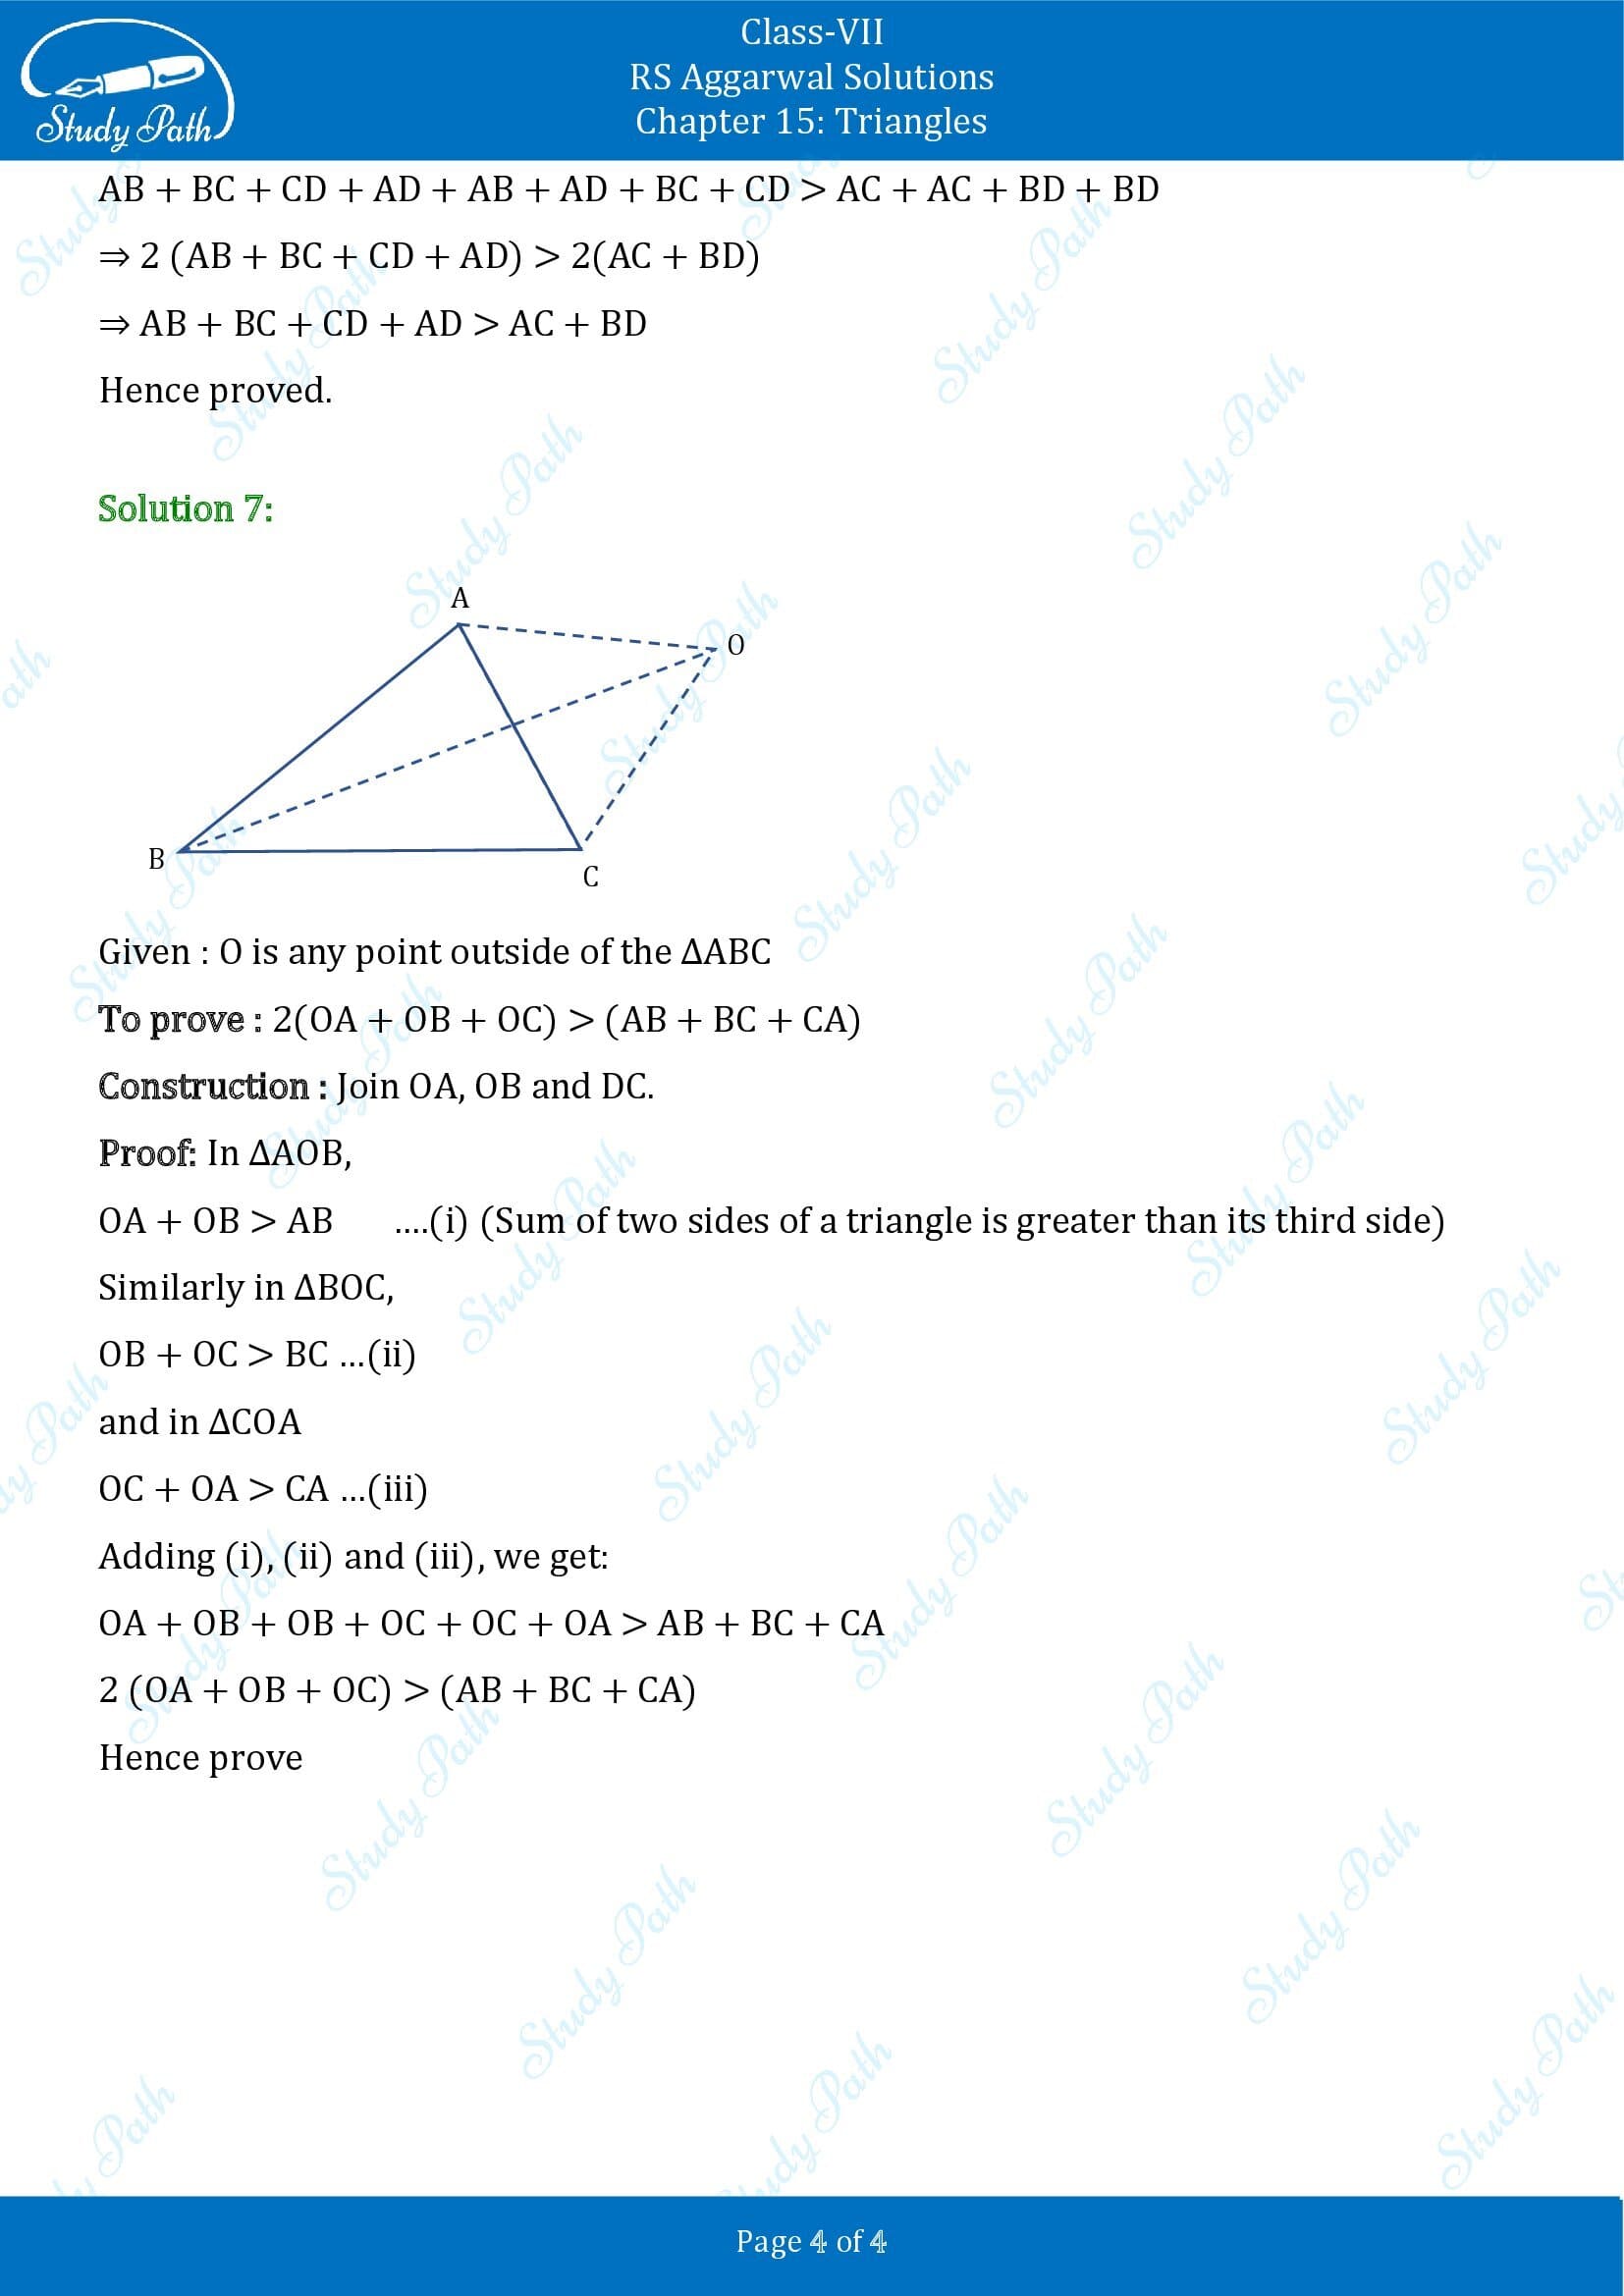 RS Aggarwal Solutions Class 7 Chapter 15 Triangles Exercise 15C 00004